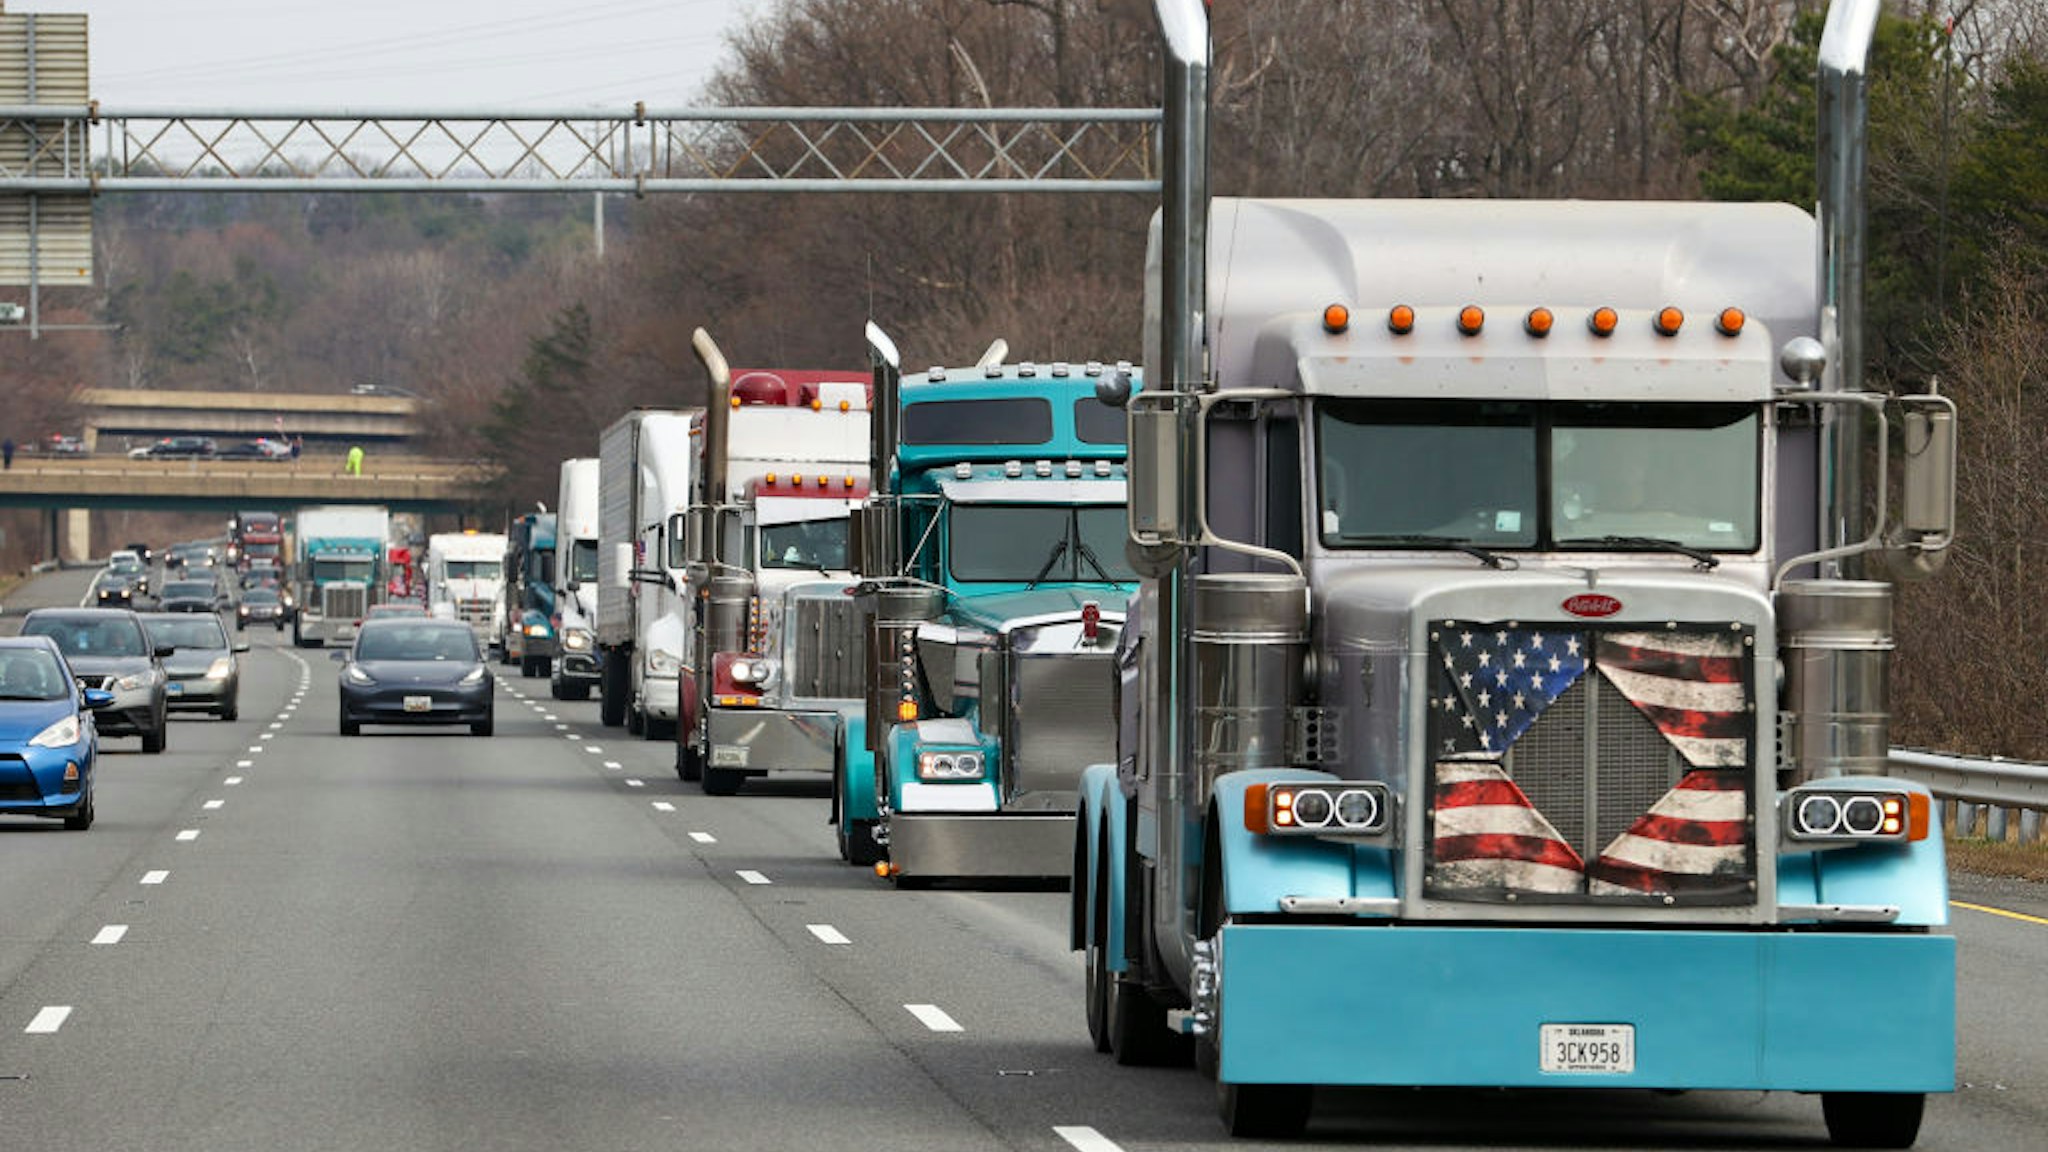 WASHINGTON D.C., USA - MARCH 6: 'The People's Convoy' circle the Beltway in Washington D.C., United States on March 6, 2022. The truckers leading the convoy are demanding an end to the vaccination mandates and full reopening of the country. (Photo by